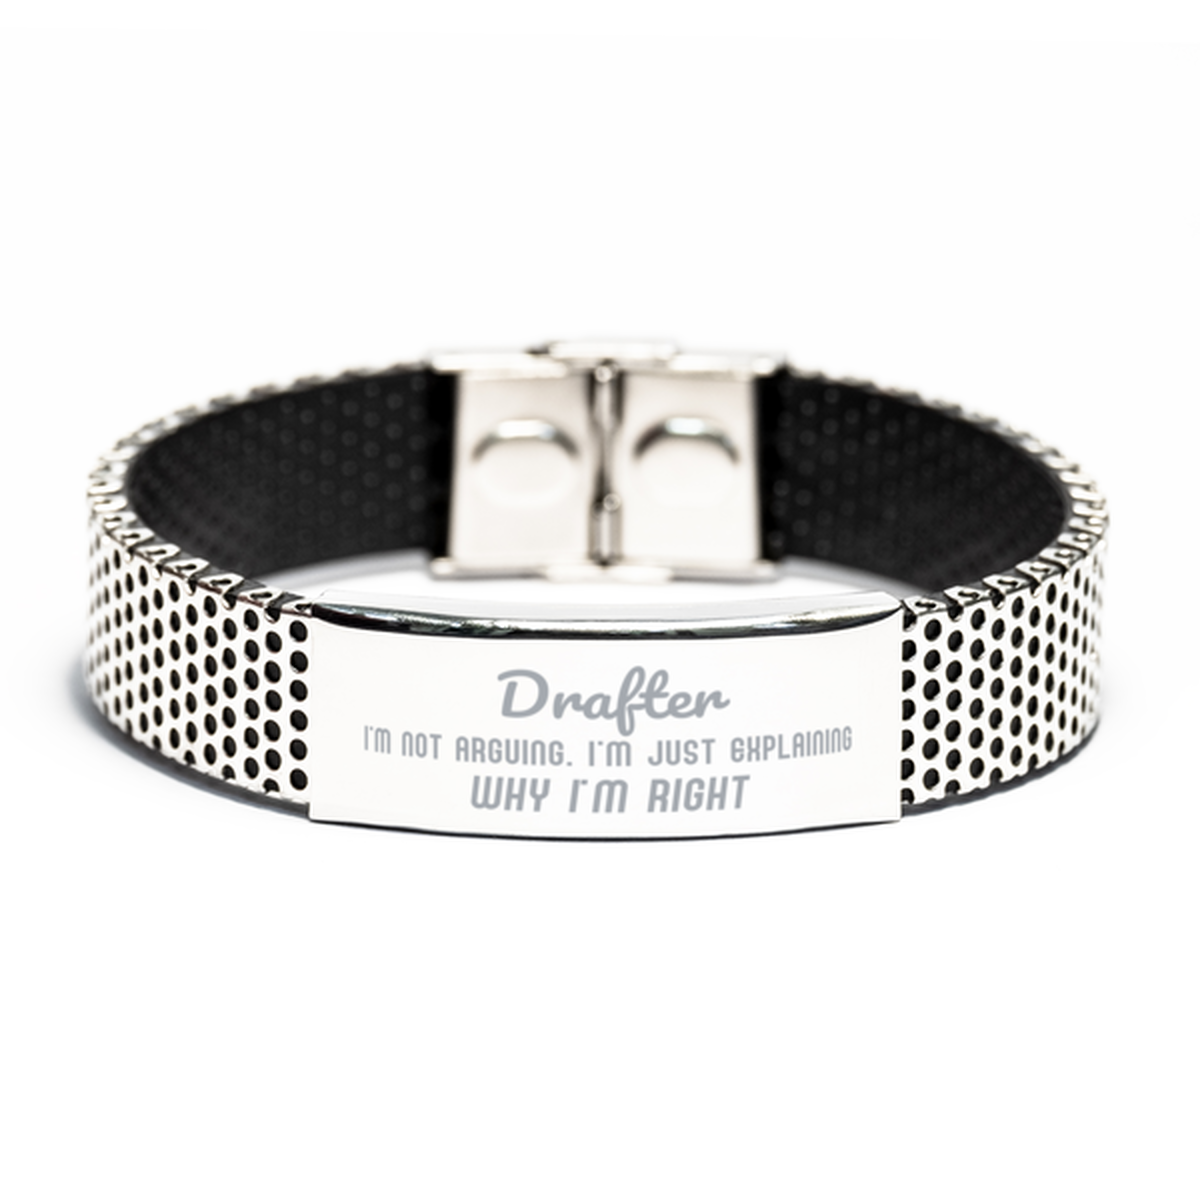 Drafter I'm not Arguing. I'm Just Explaining Why I'm RIGHT Stainless Steel Bracelet, Funny Saying Quote Drafter Gifts For Drafter Graduation Birthday Christmas Gifts for Men Women Coworker